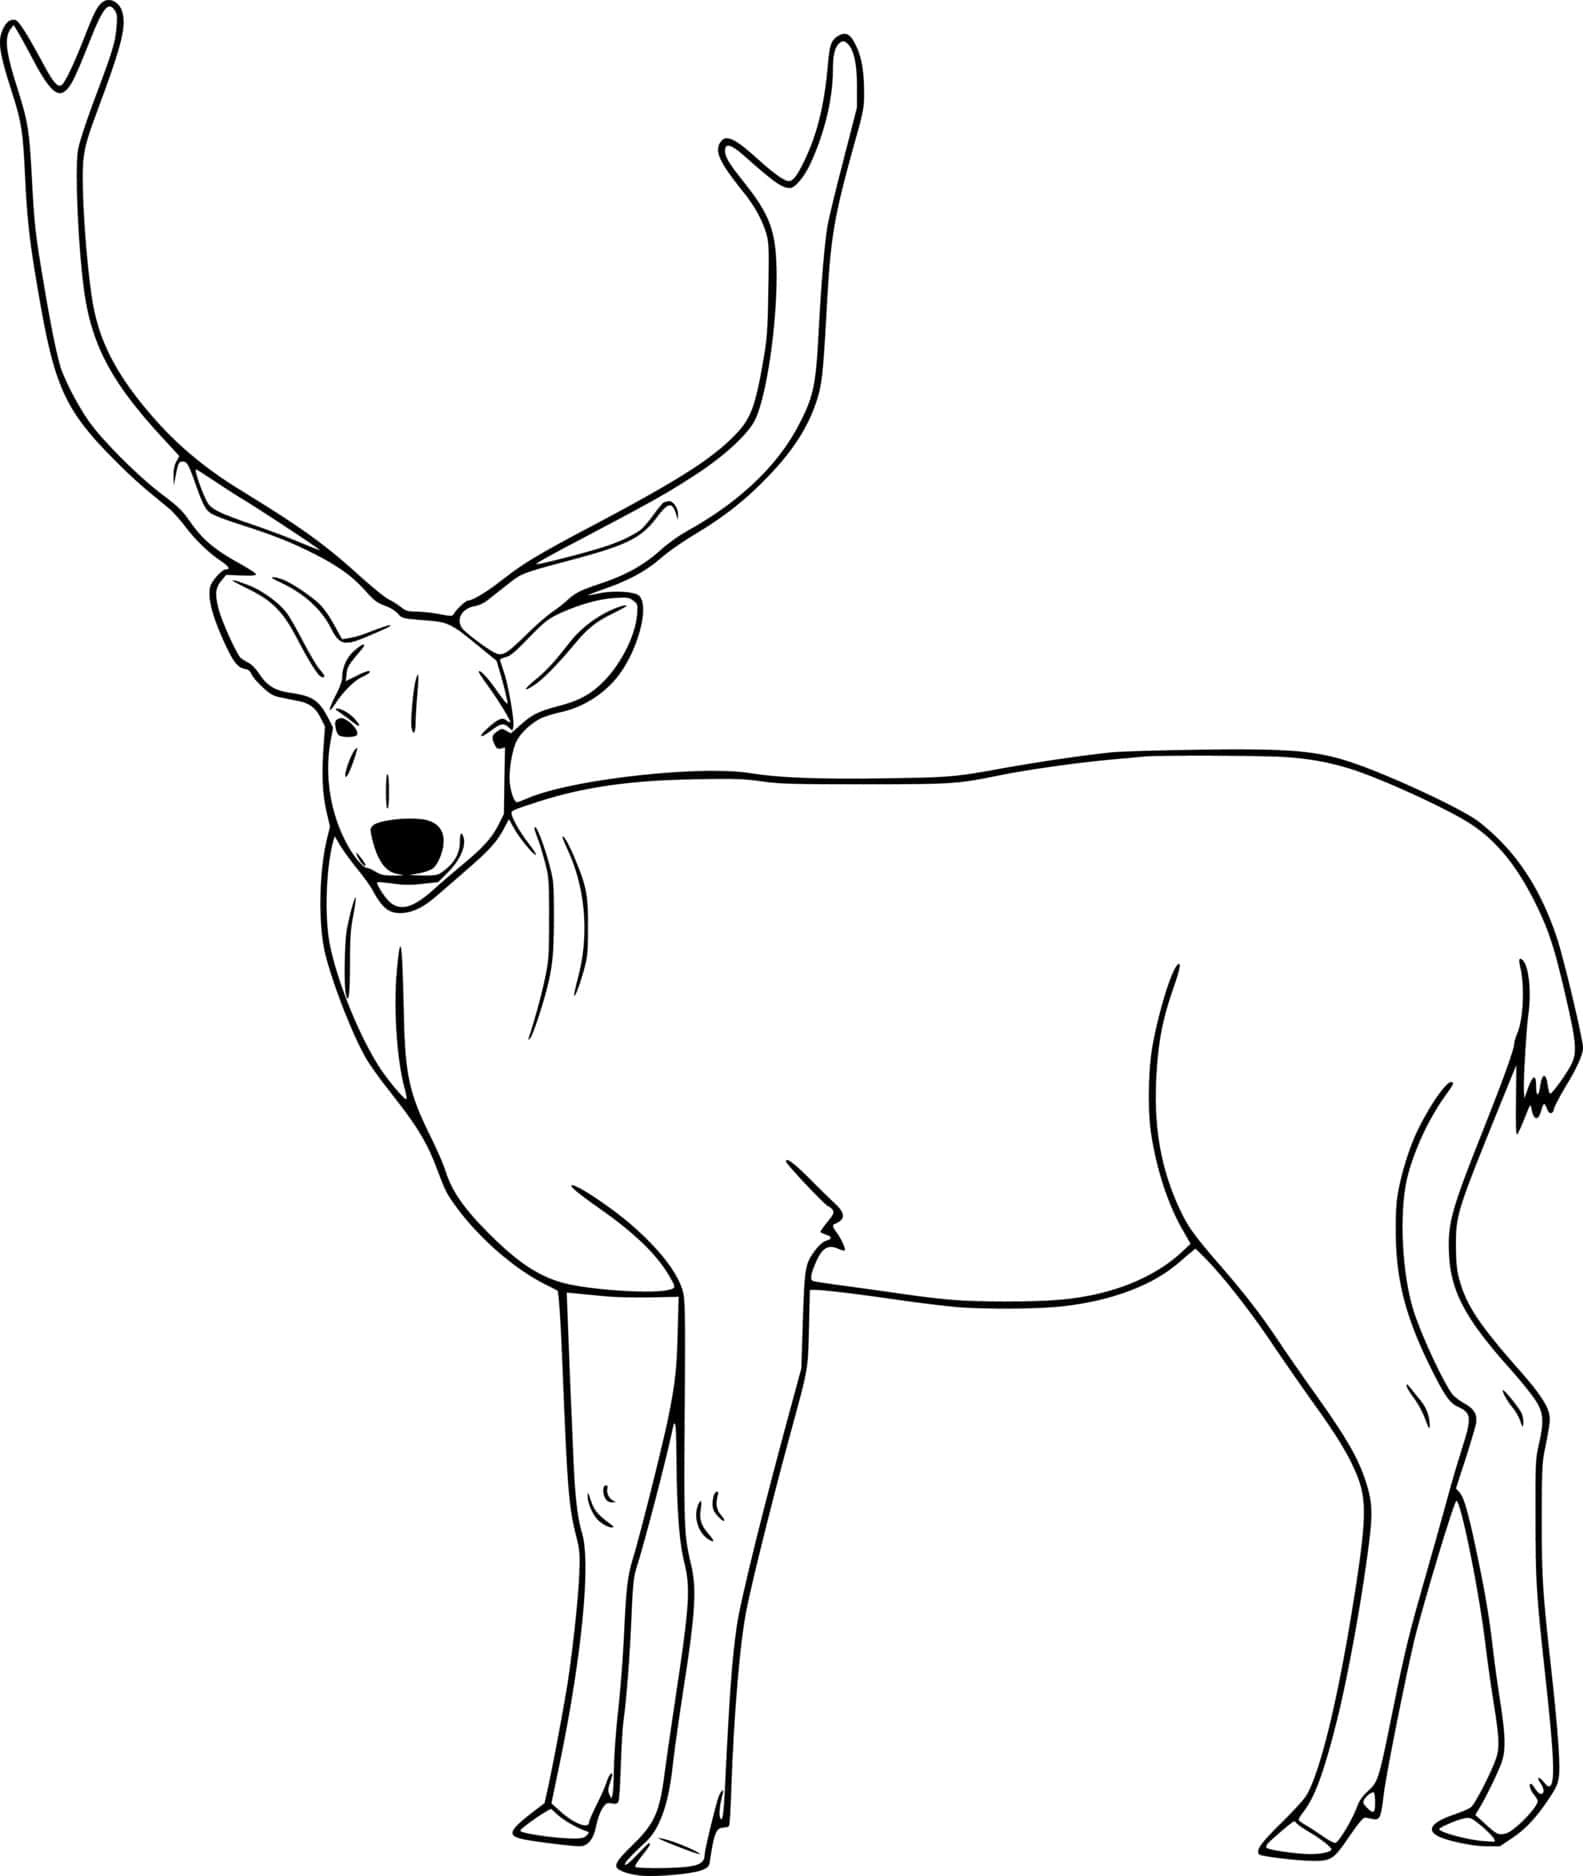 Easy Realistic Deer Coloring Page